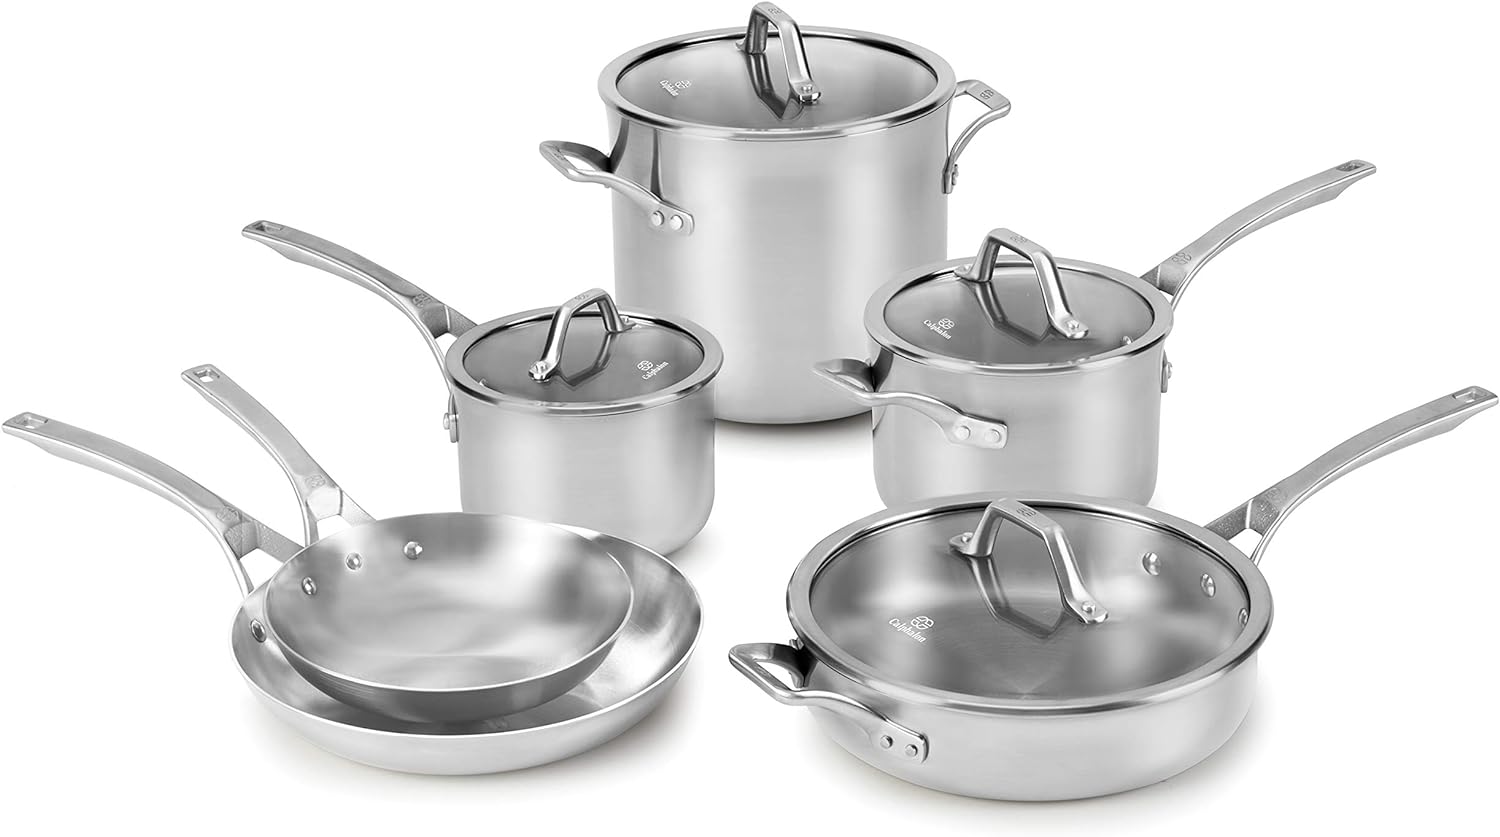 Stainless Steel Kitchen Cookware Review